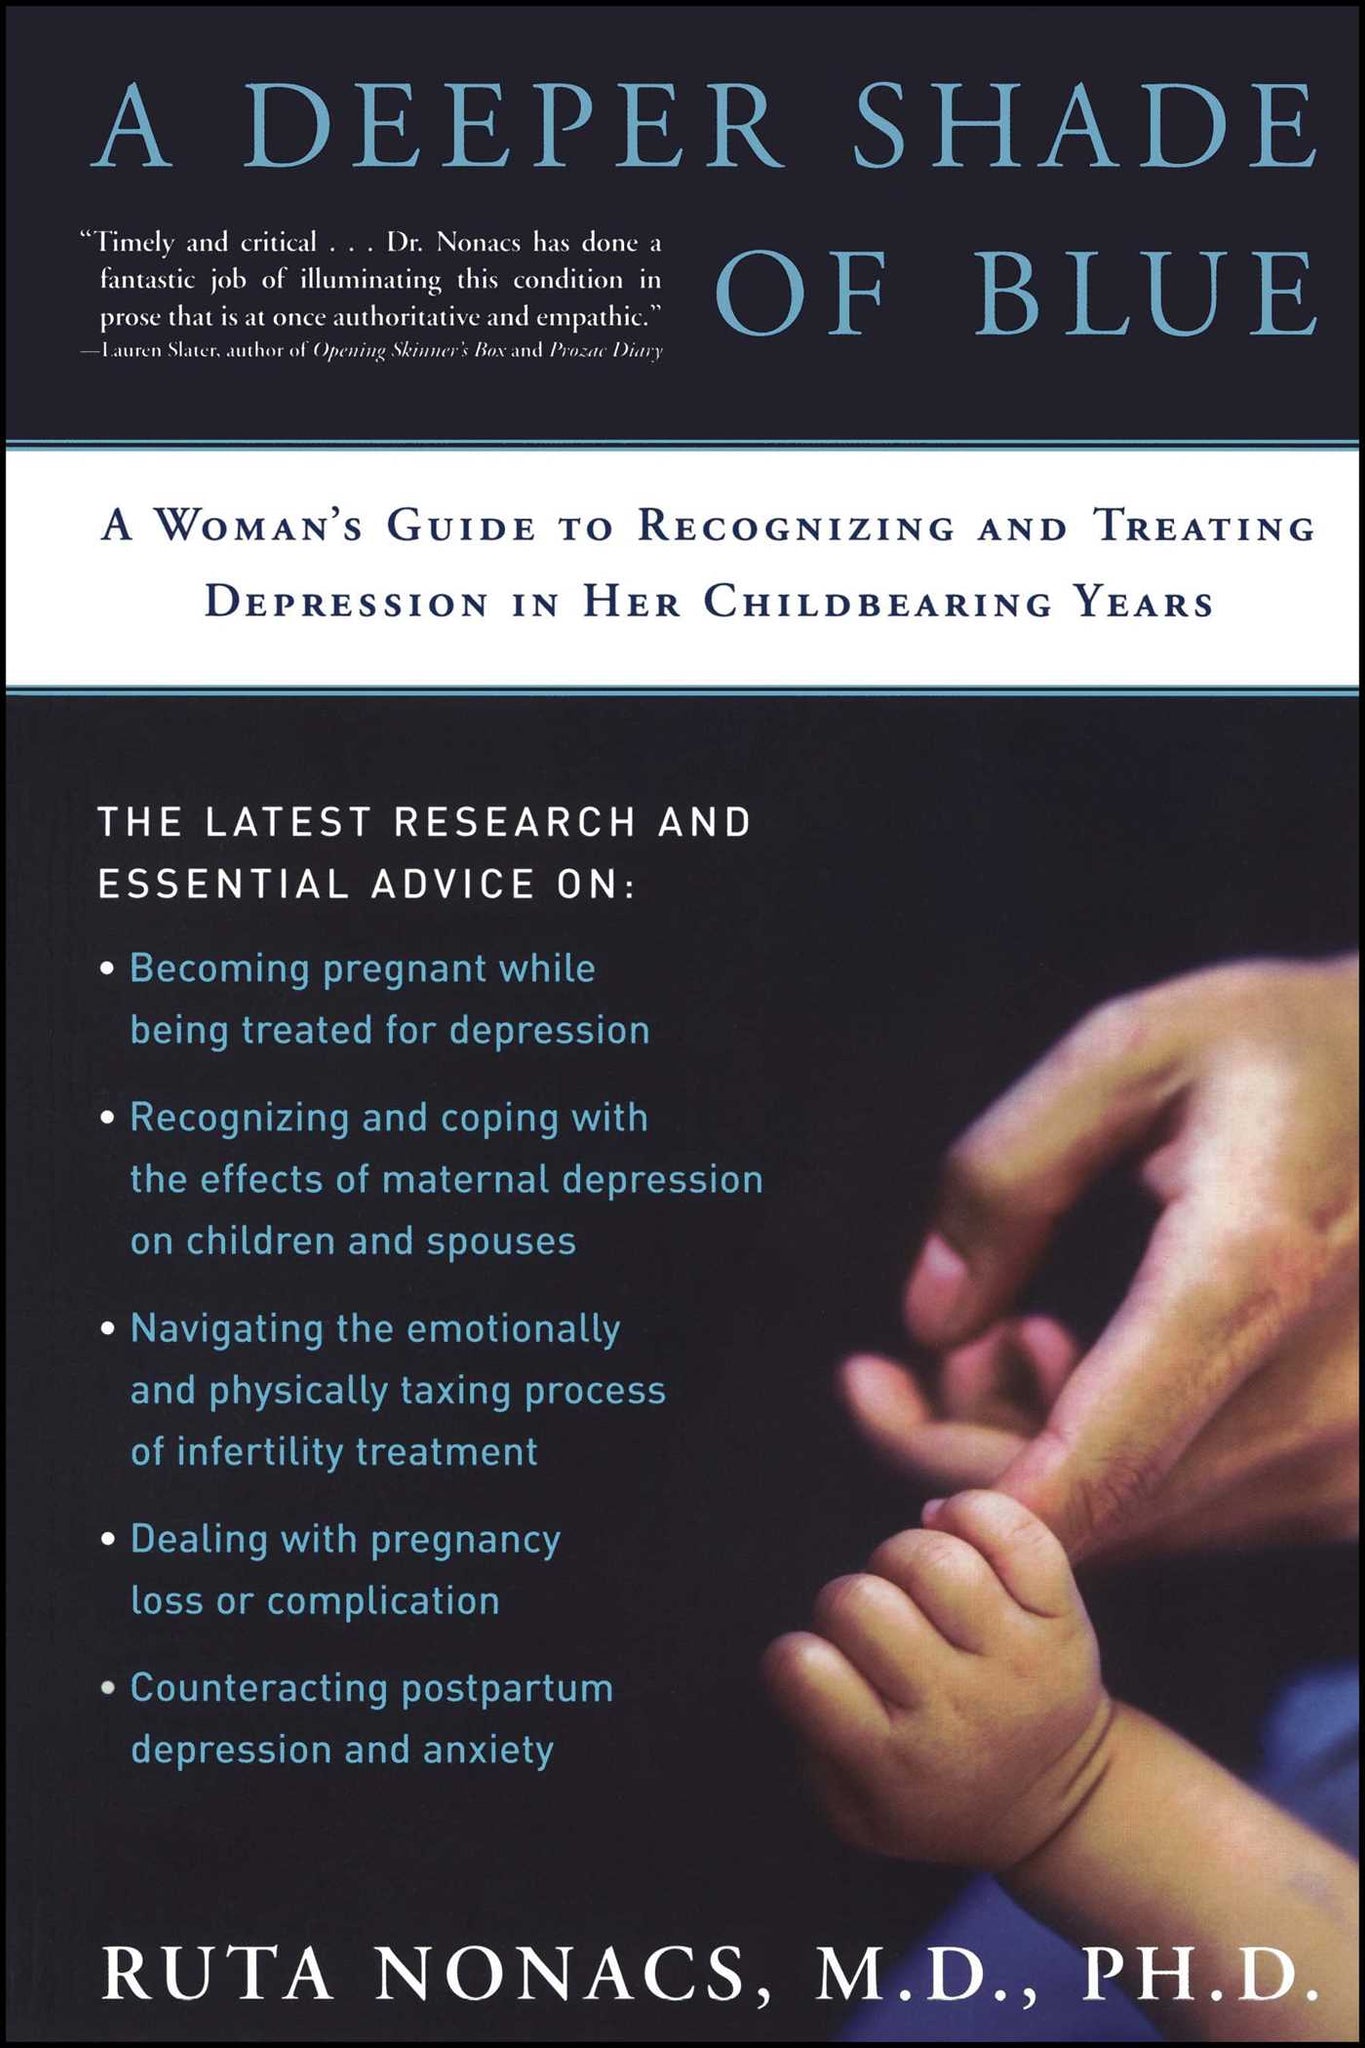 A Deeper Shade of Blue : A Woman's Guide to Recognizing and Treating Depression in Her Childbearing Years